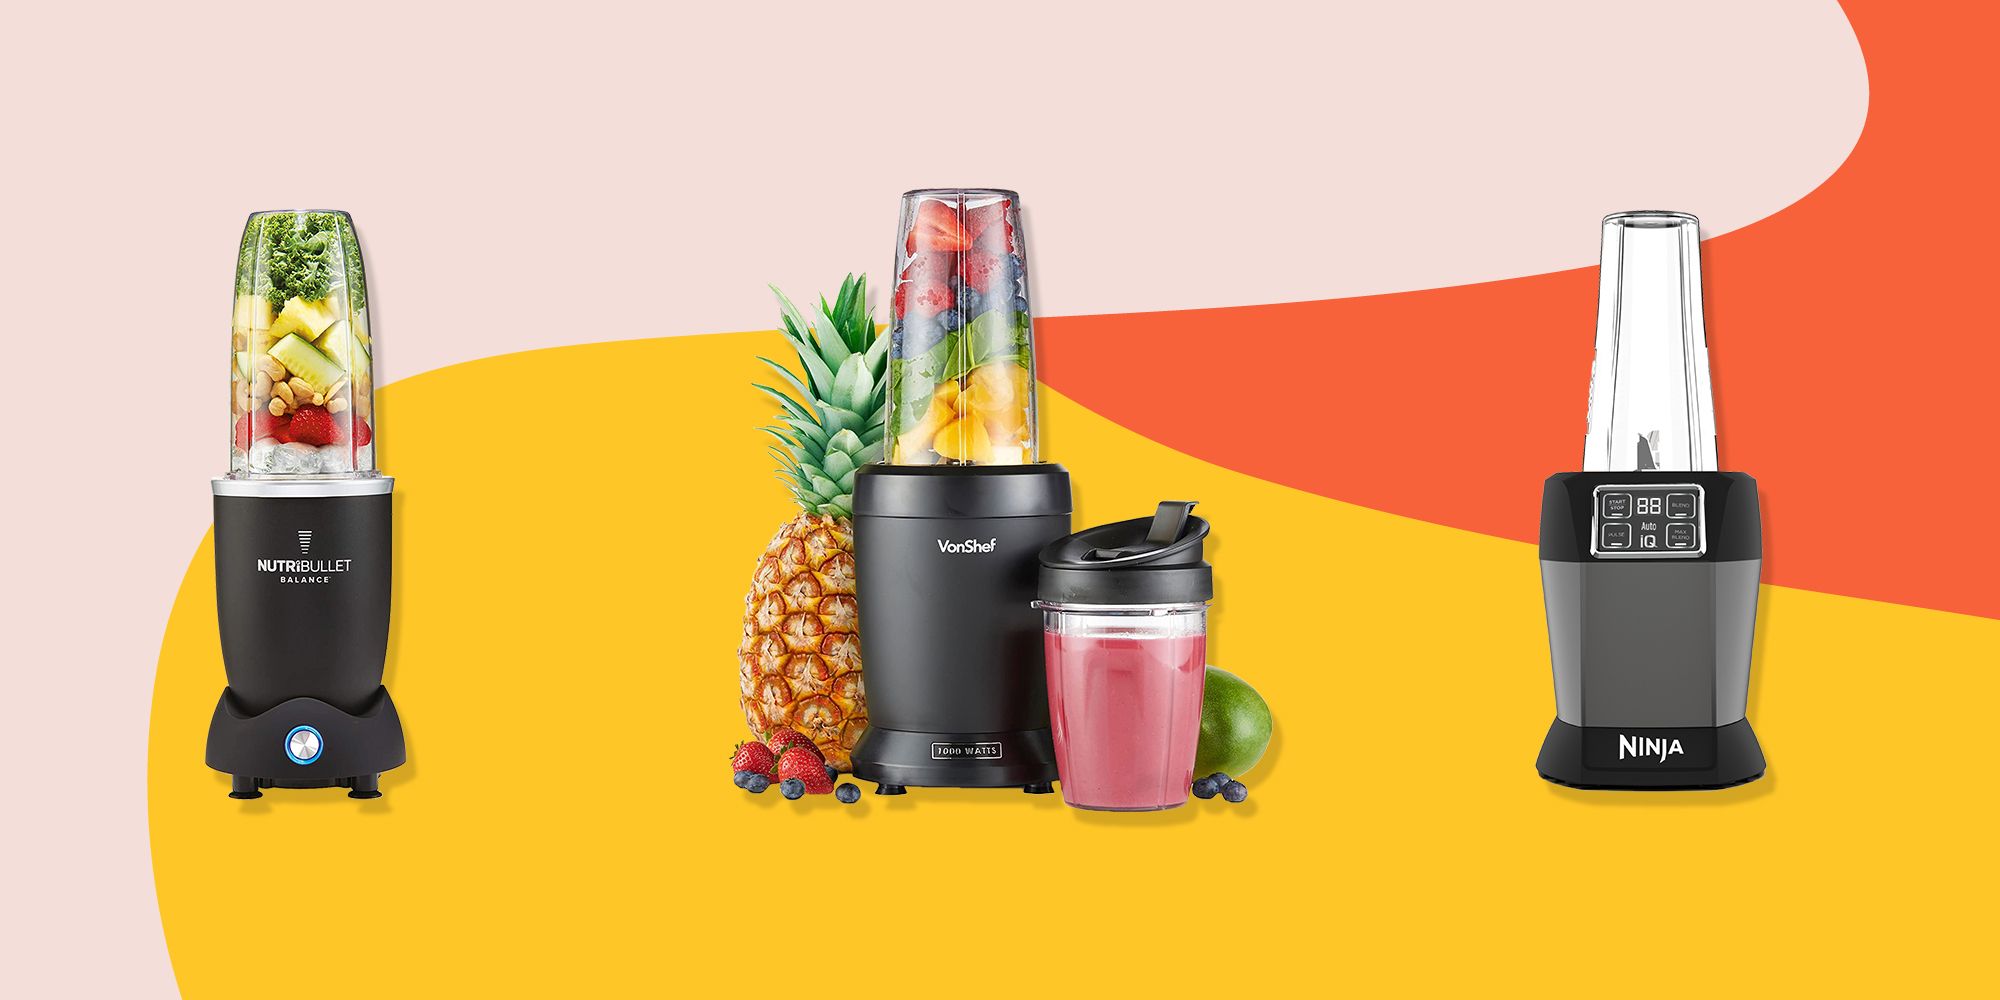 Best Smoothie Makers 2022: From NutriBullet, NutriNinja And More